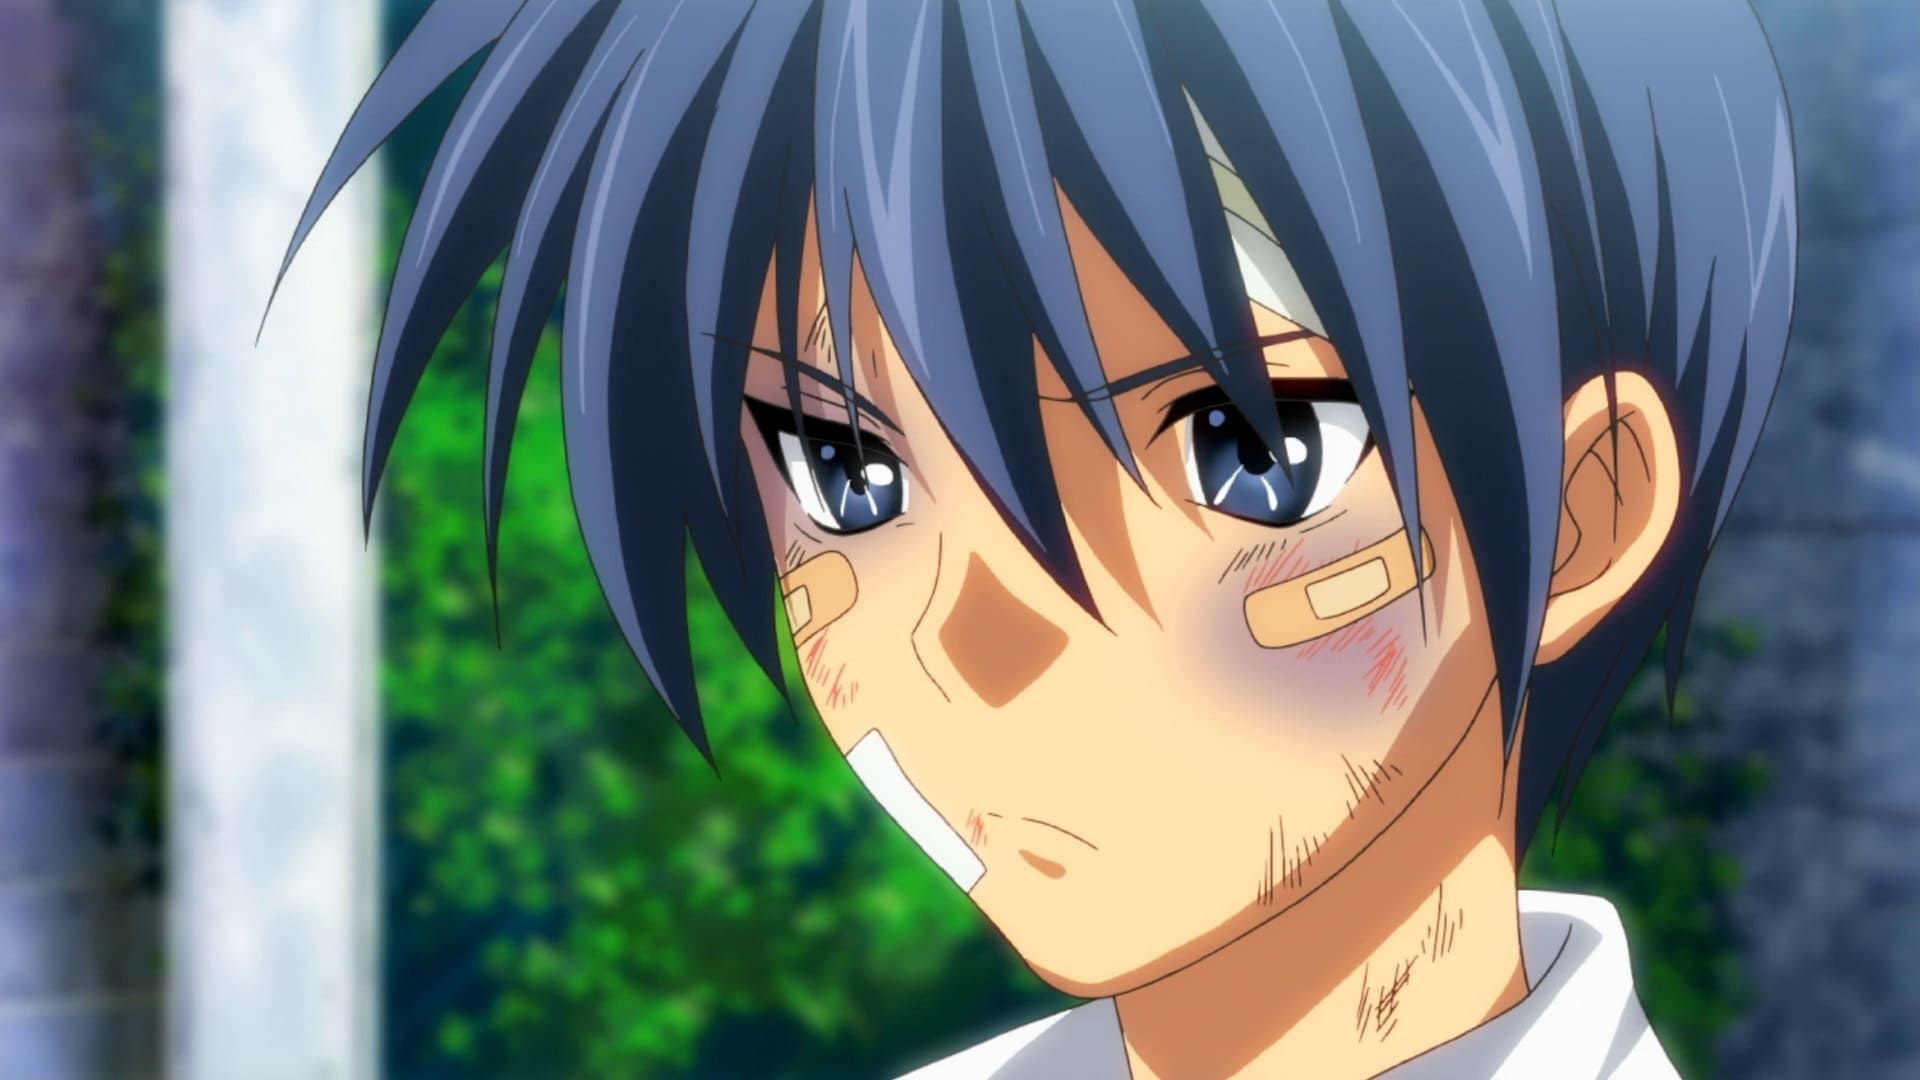 Clannad Season 2: Where To Watch Every Episode